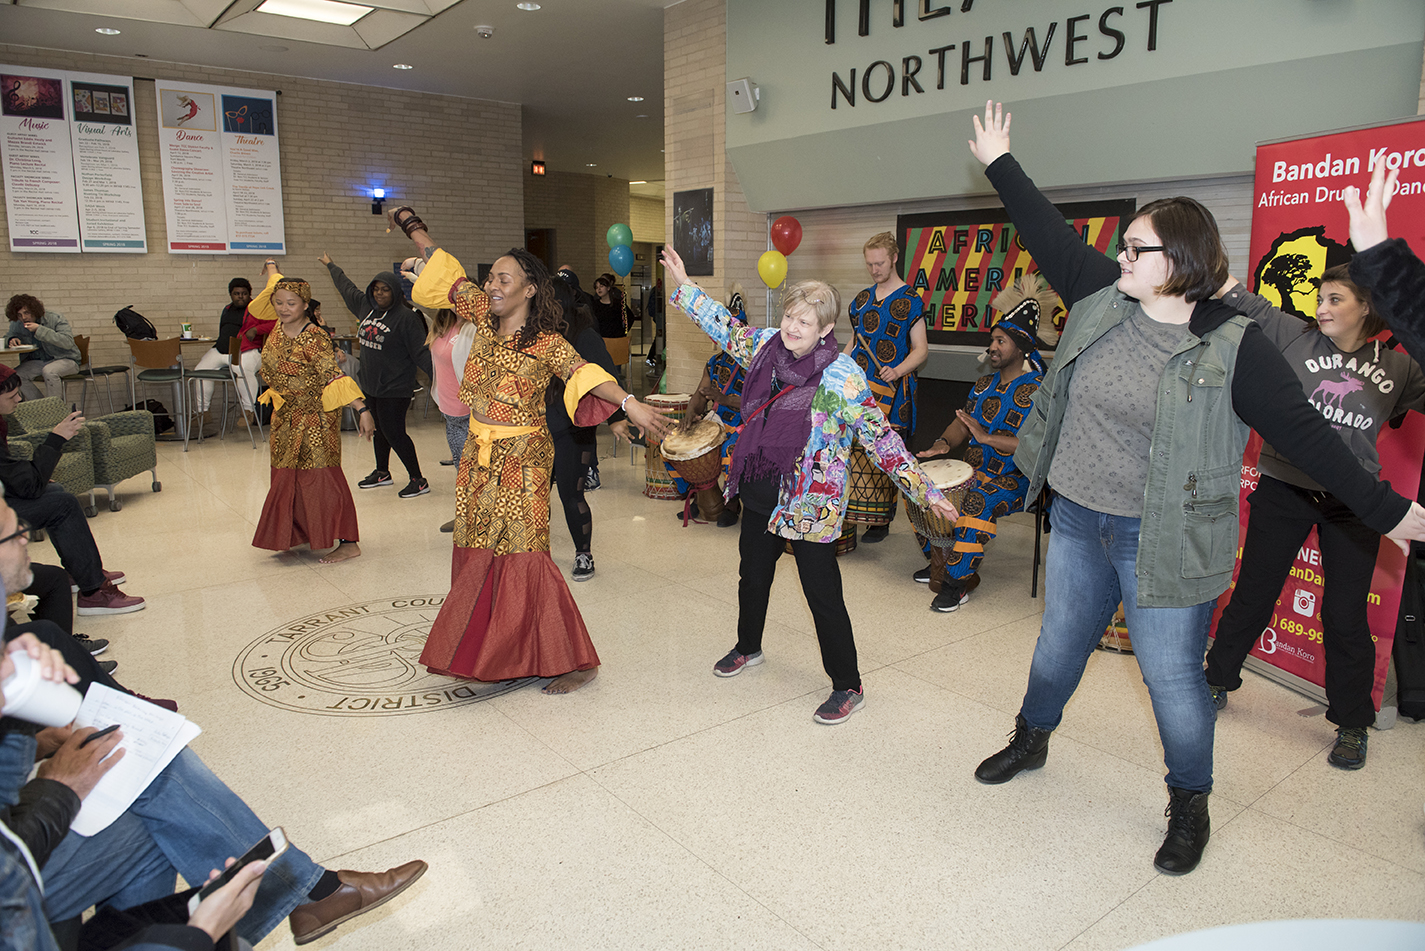 NW students join in dancing with the Bandan Koro traditional African drummers Feb. 7.